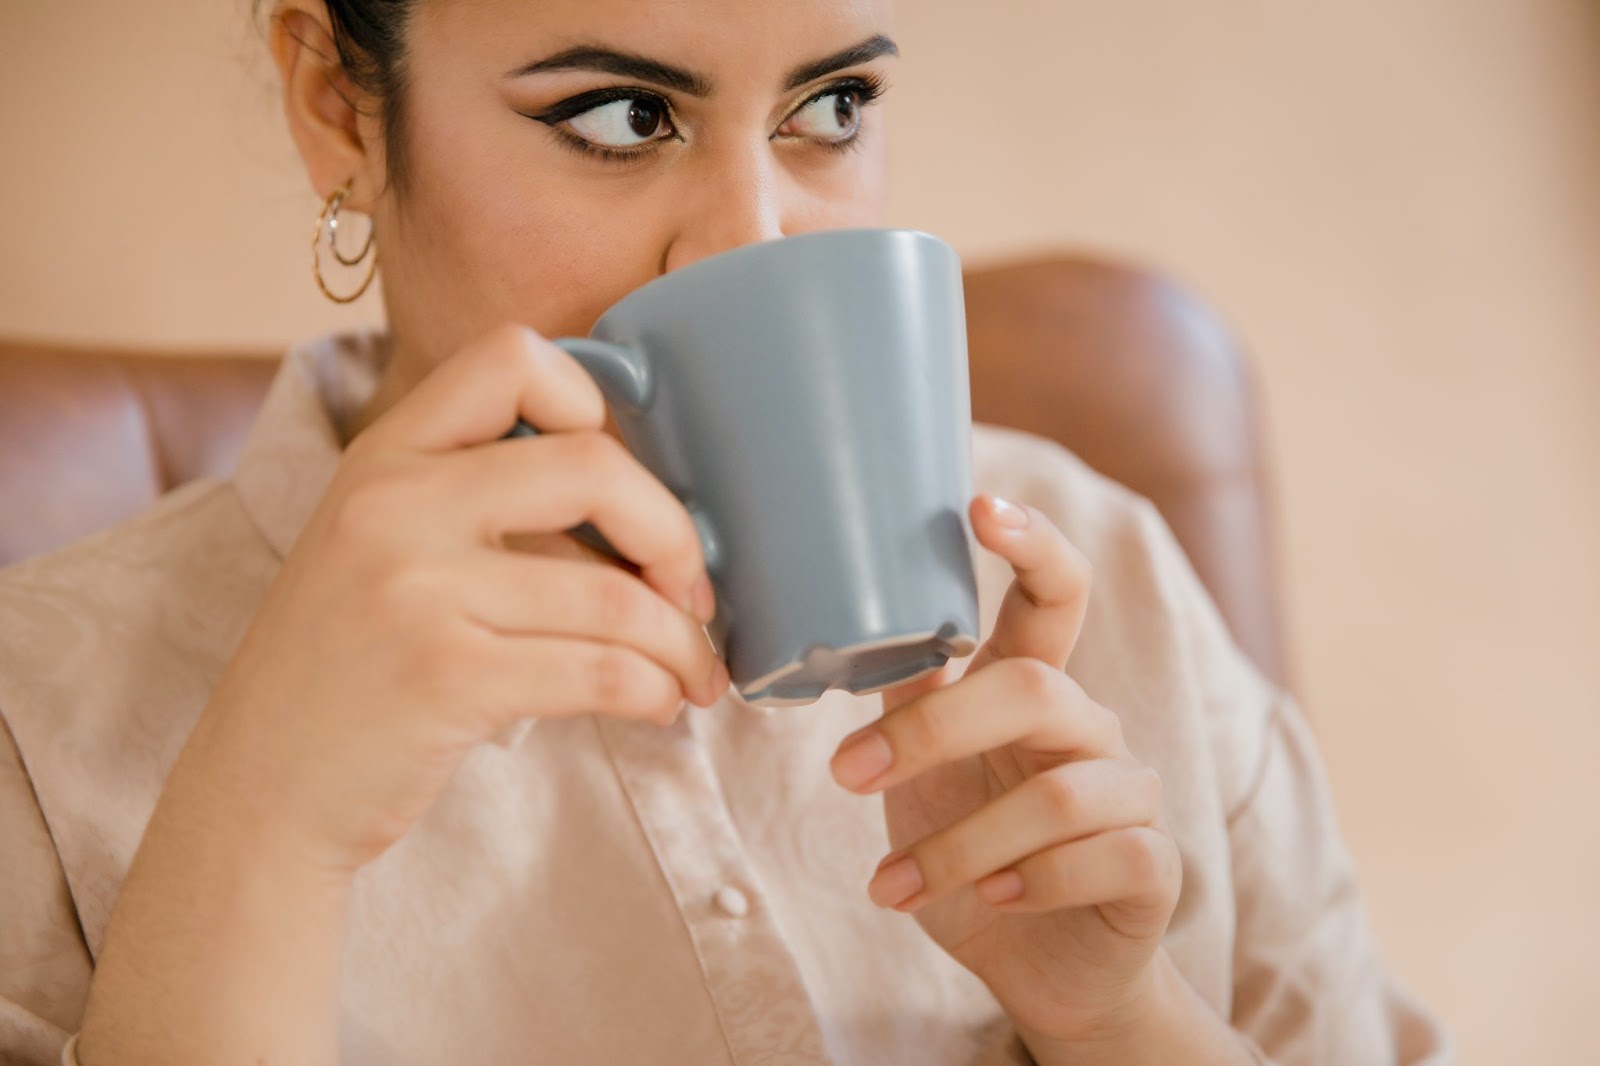 Women sipping coffee with dermal fillers